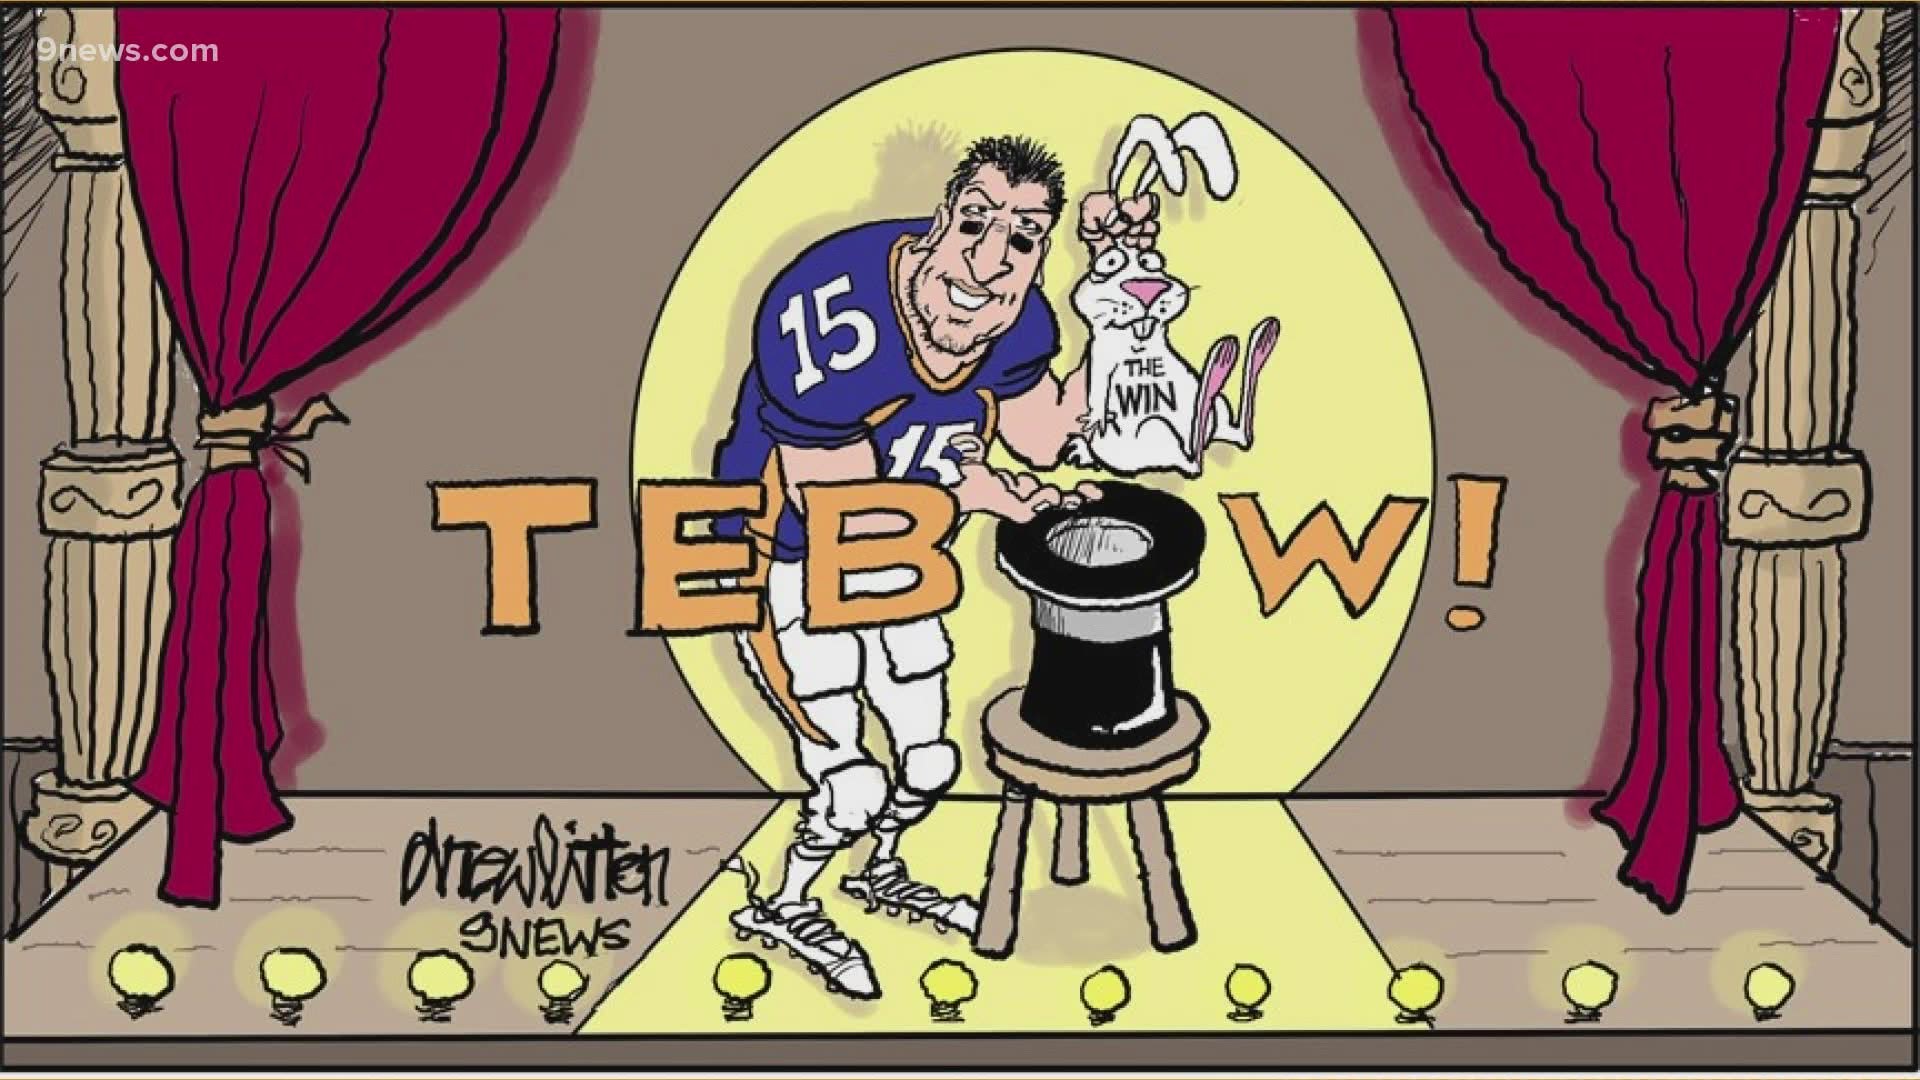 Local cartoonist Drew Litton discusses his memories of Tebowmania in Denver and the drawings it inspired.